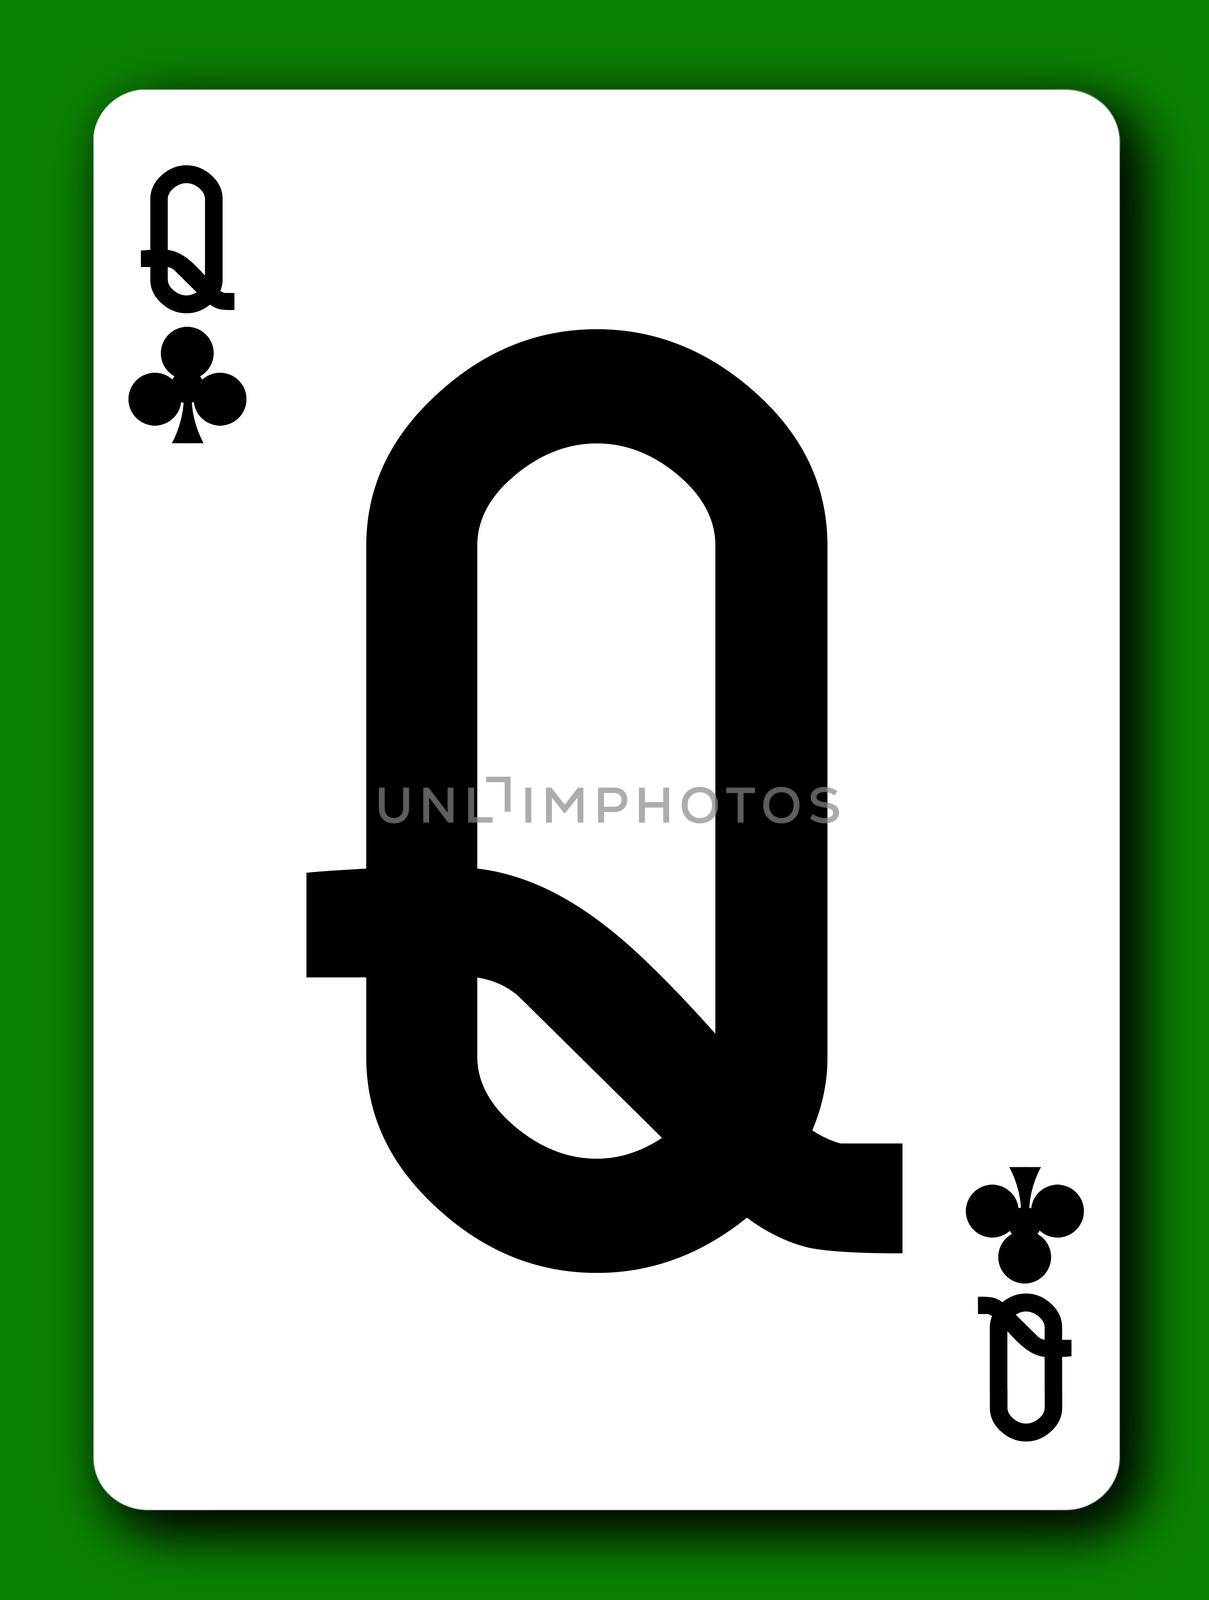 A Queen of Clubs playing card with clipping path to remove background and shadow 3d illustration